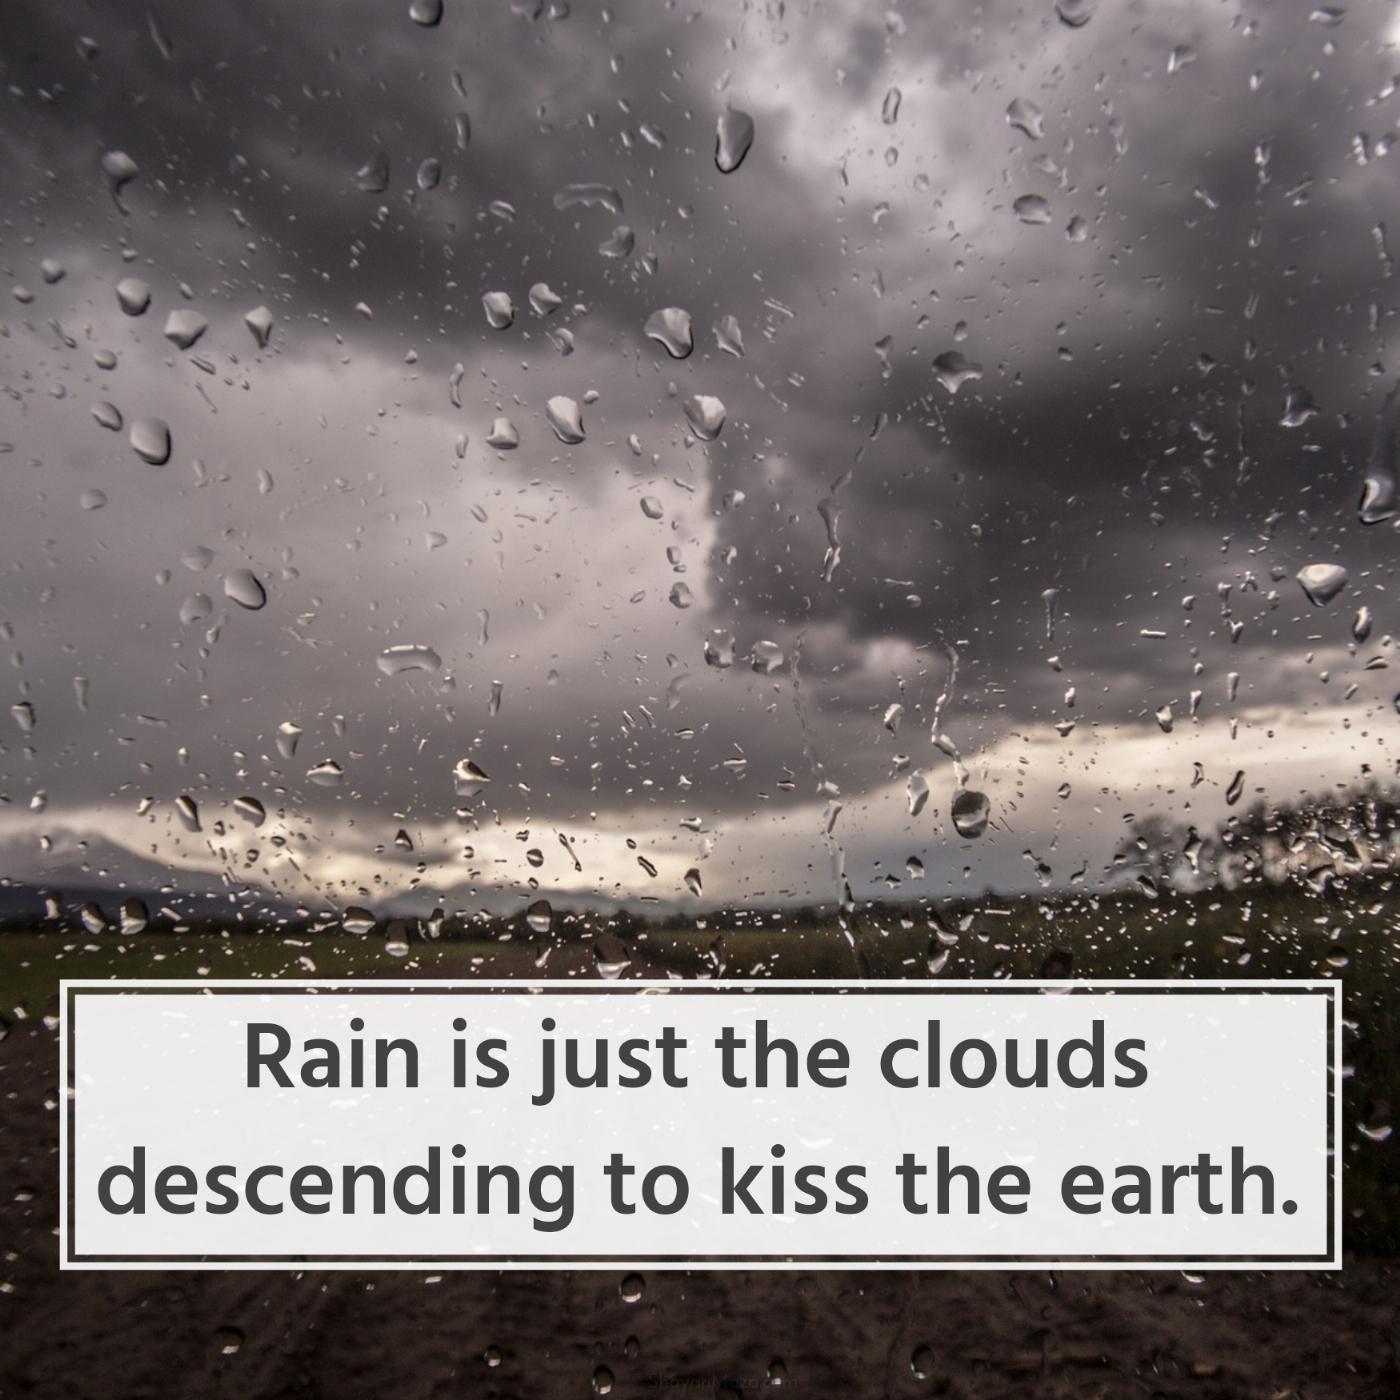 Rain is just the clouds descending to kiss the earth